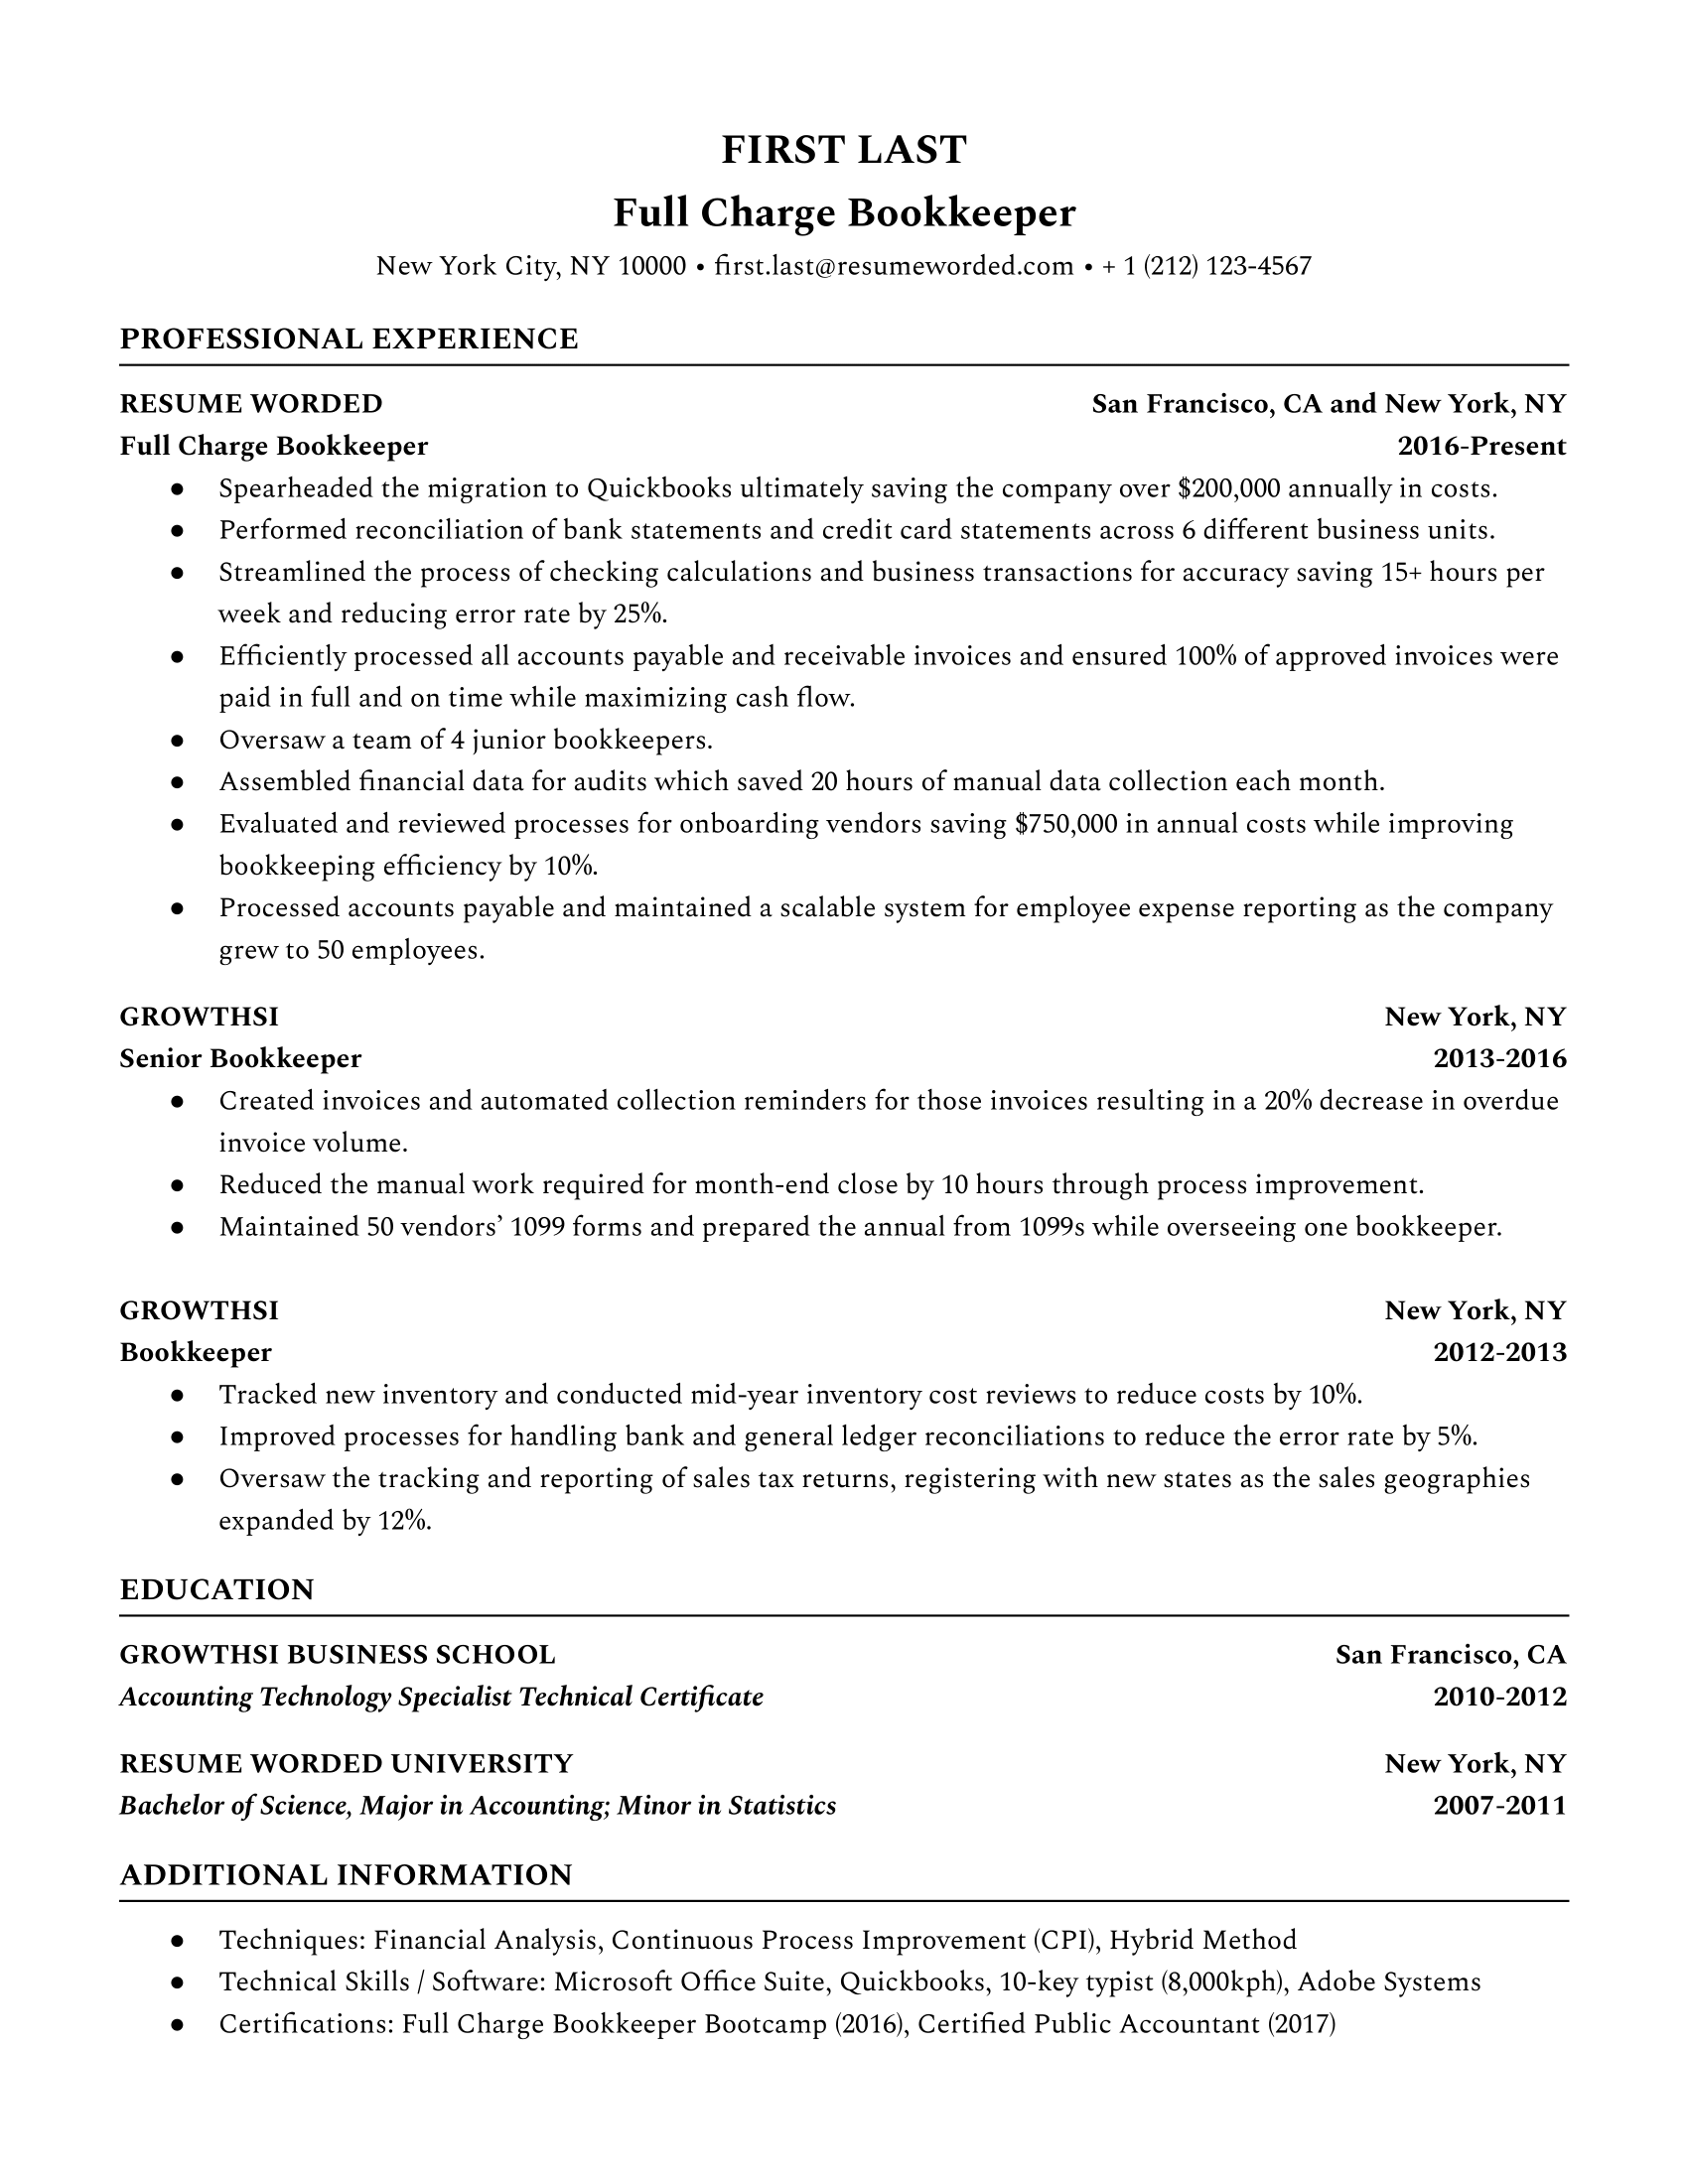 Full Charge Bookkeeper Resume Template + Example